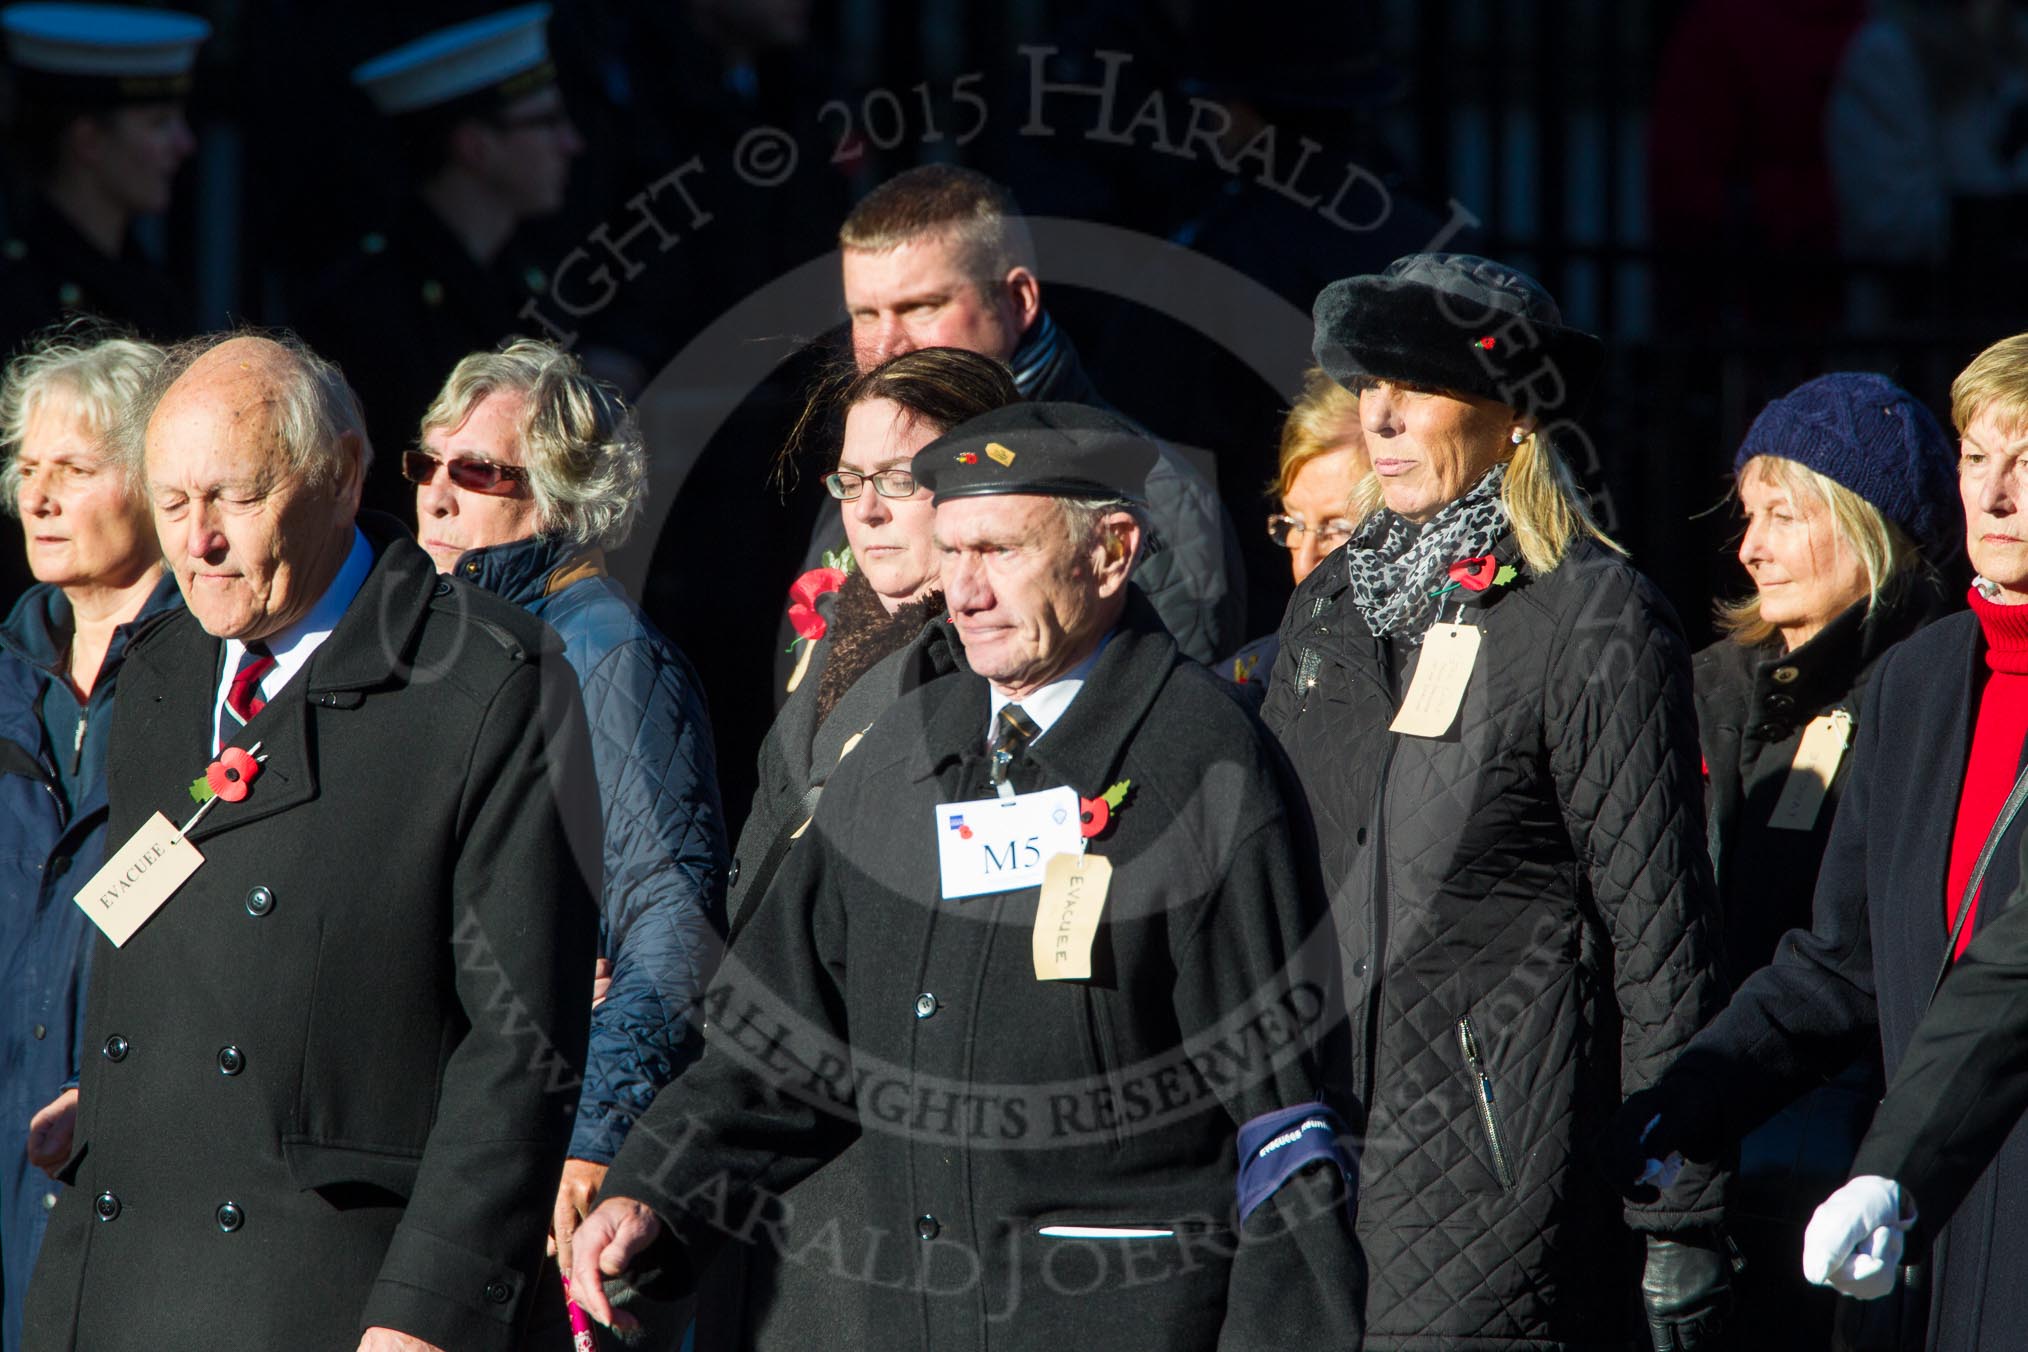 Remembrance Sunday Cenotaph March Past 2013: M5 - Evacuees Reunion Association..
Press stand opposite the Foreign Office building, Whitehall, London SW1,
London,
Greater London,
United Kingdom,
on 10 November 2013 at 12:10, image #1908